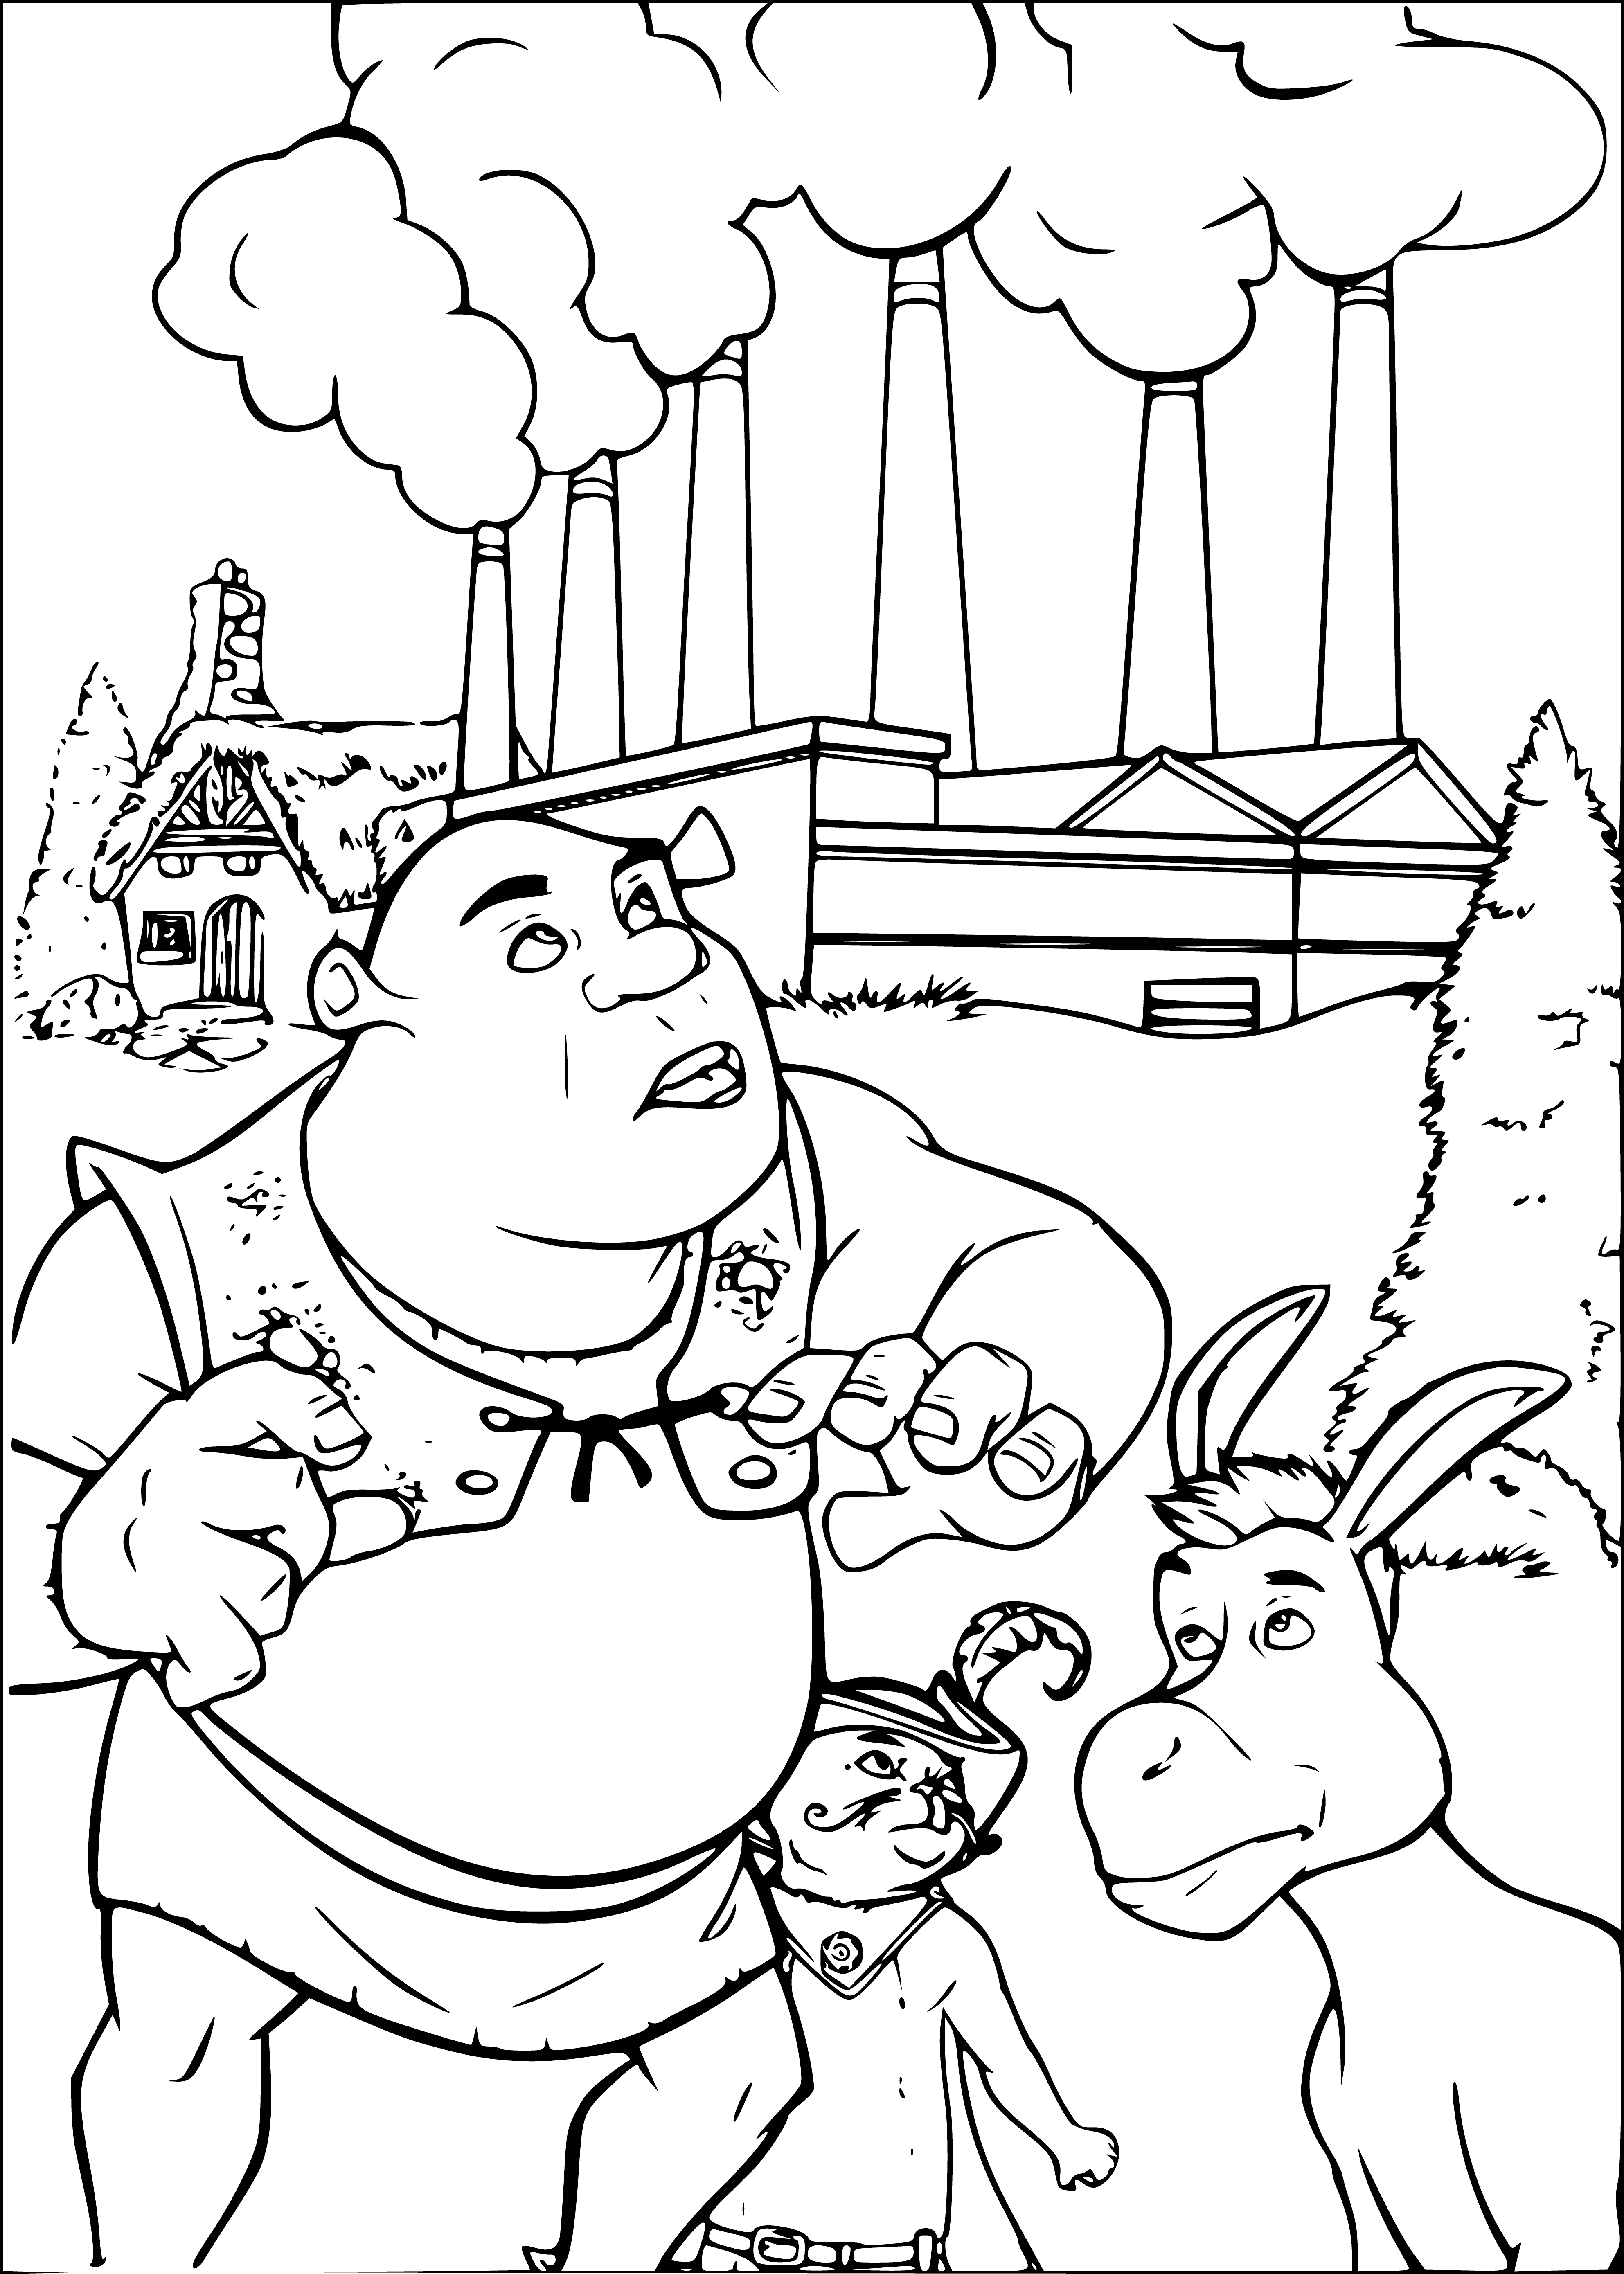 coloring page: Shrek stands happily with his animal friends looking on; arms crossed, big grin & all.